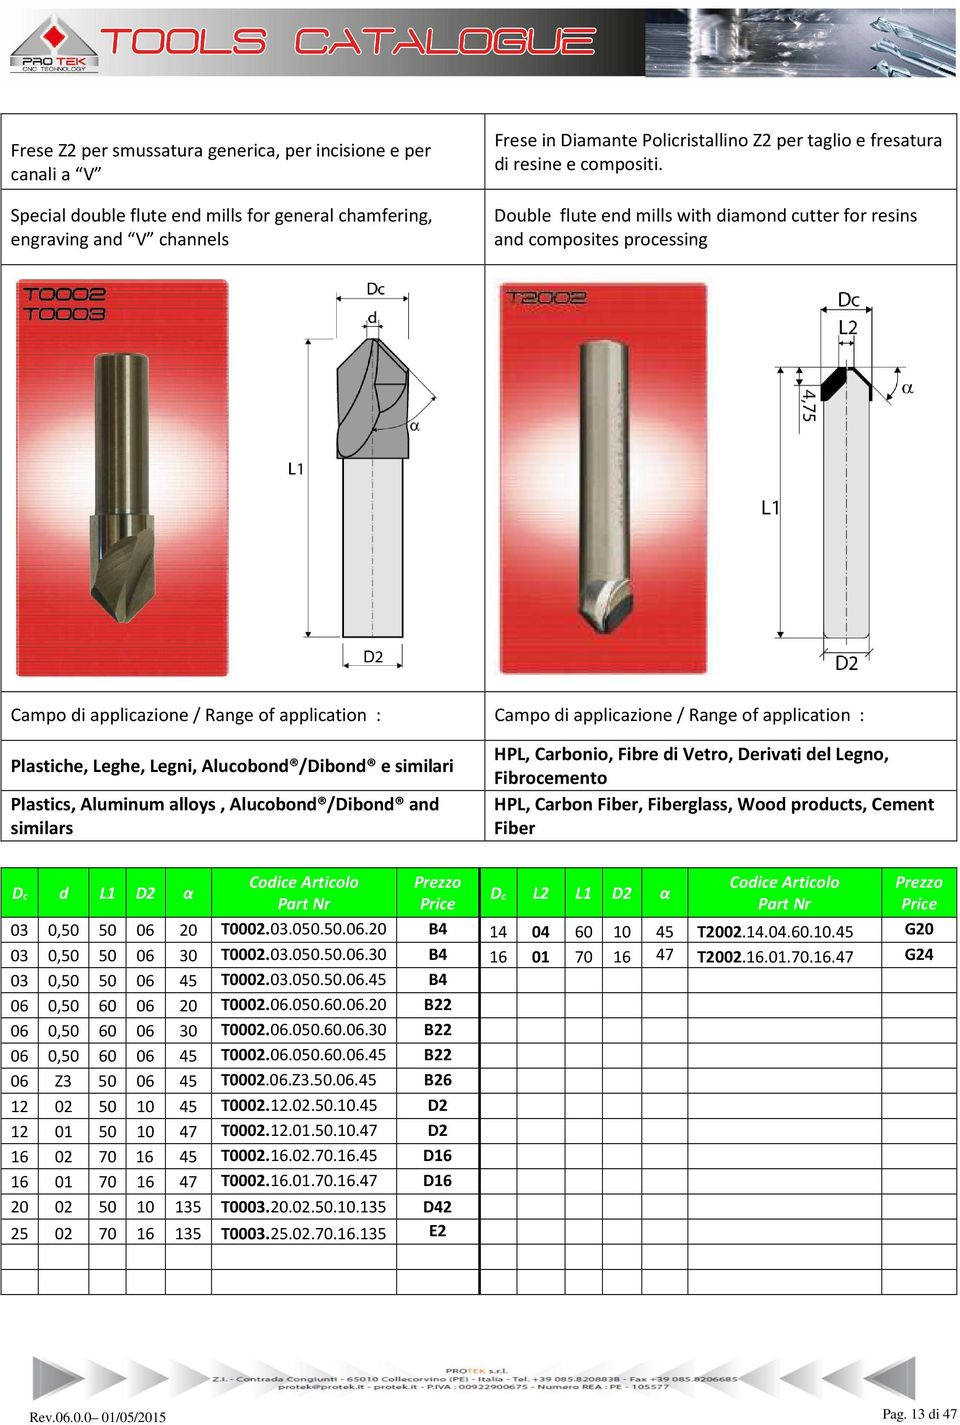 Double flute end mills with diamond cutter for resins and composites processing Campo di applicazione / Range of application : Campo di applicazione / Range of application : Plastiche, Leghe, Legni,